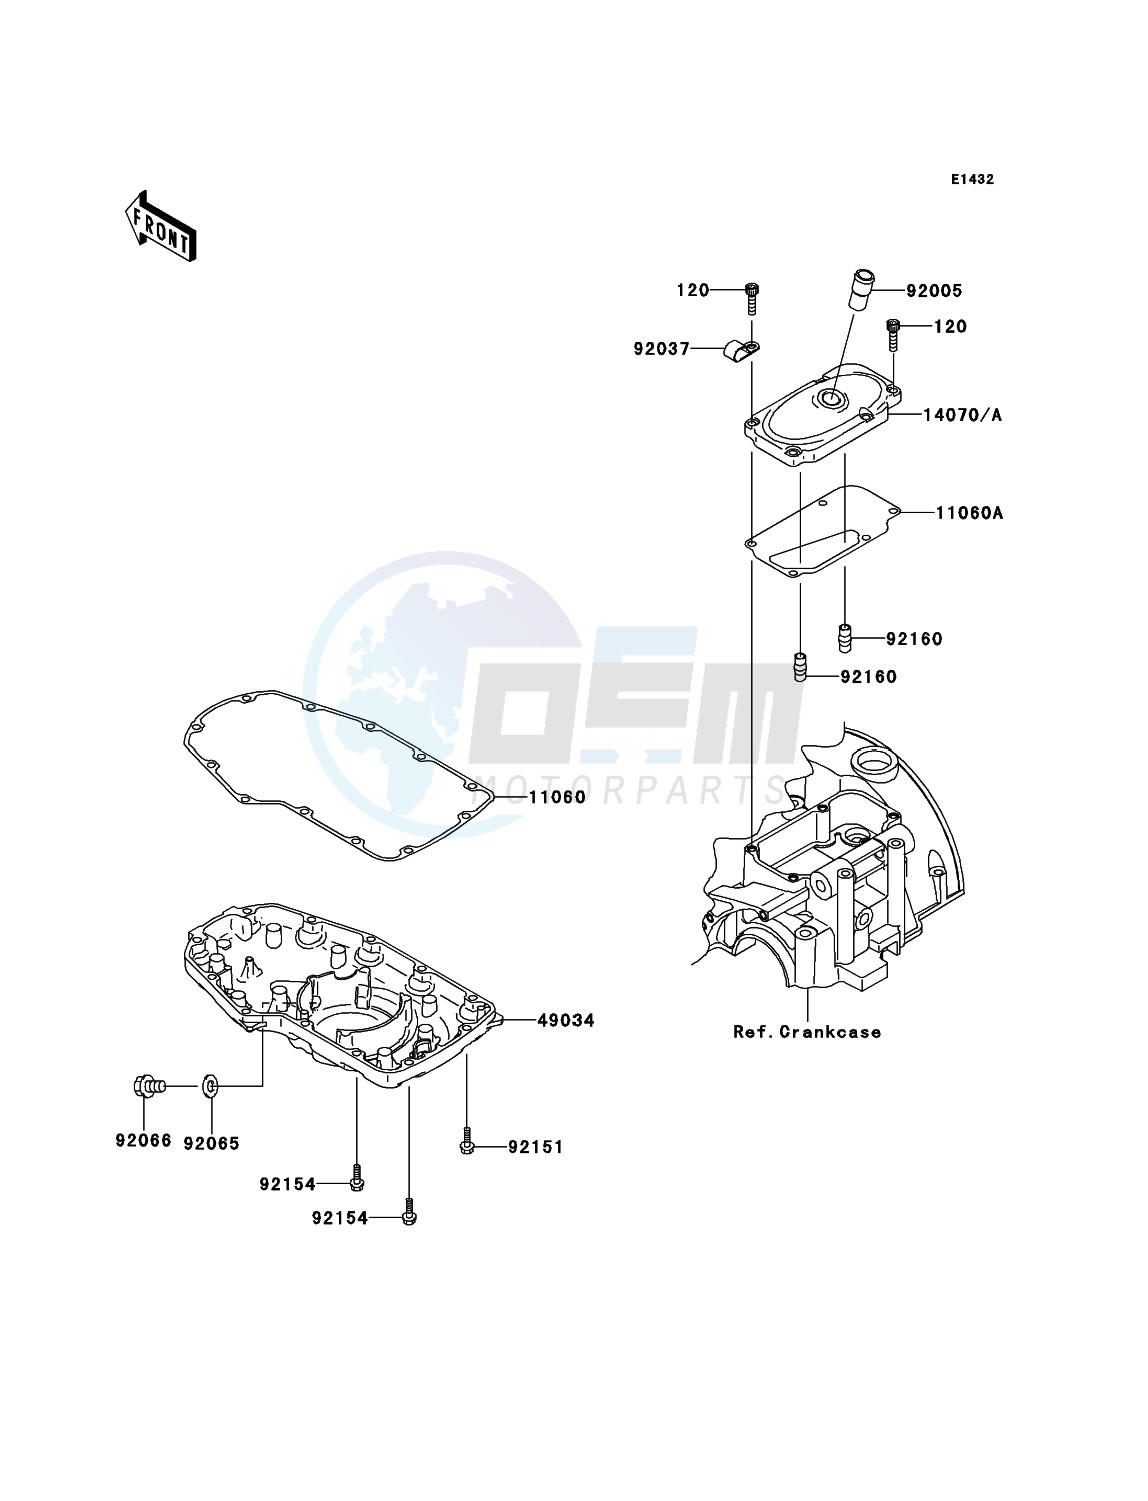 Breather Cover/Oil Pan blueprint